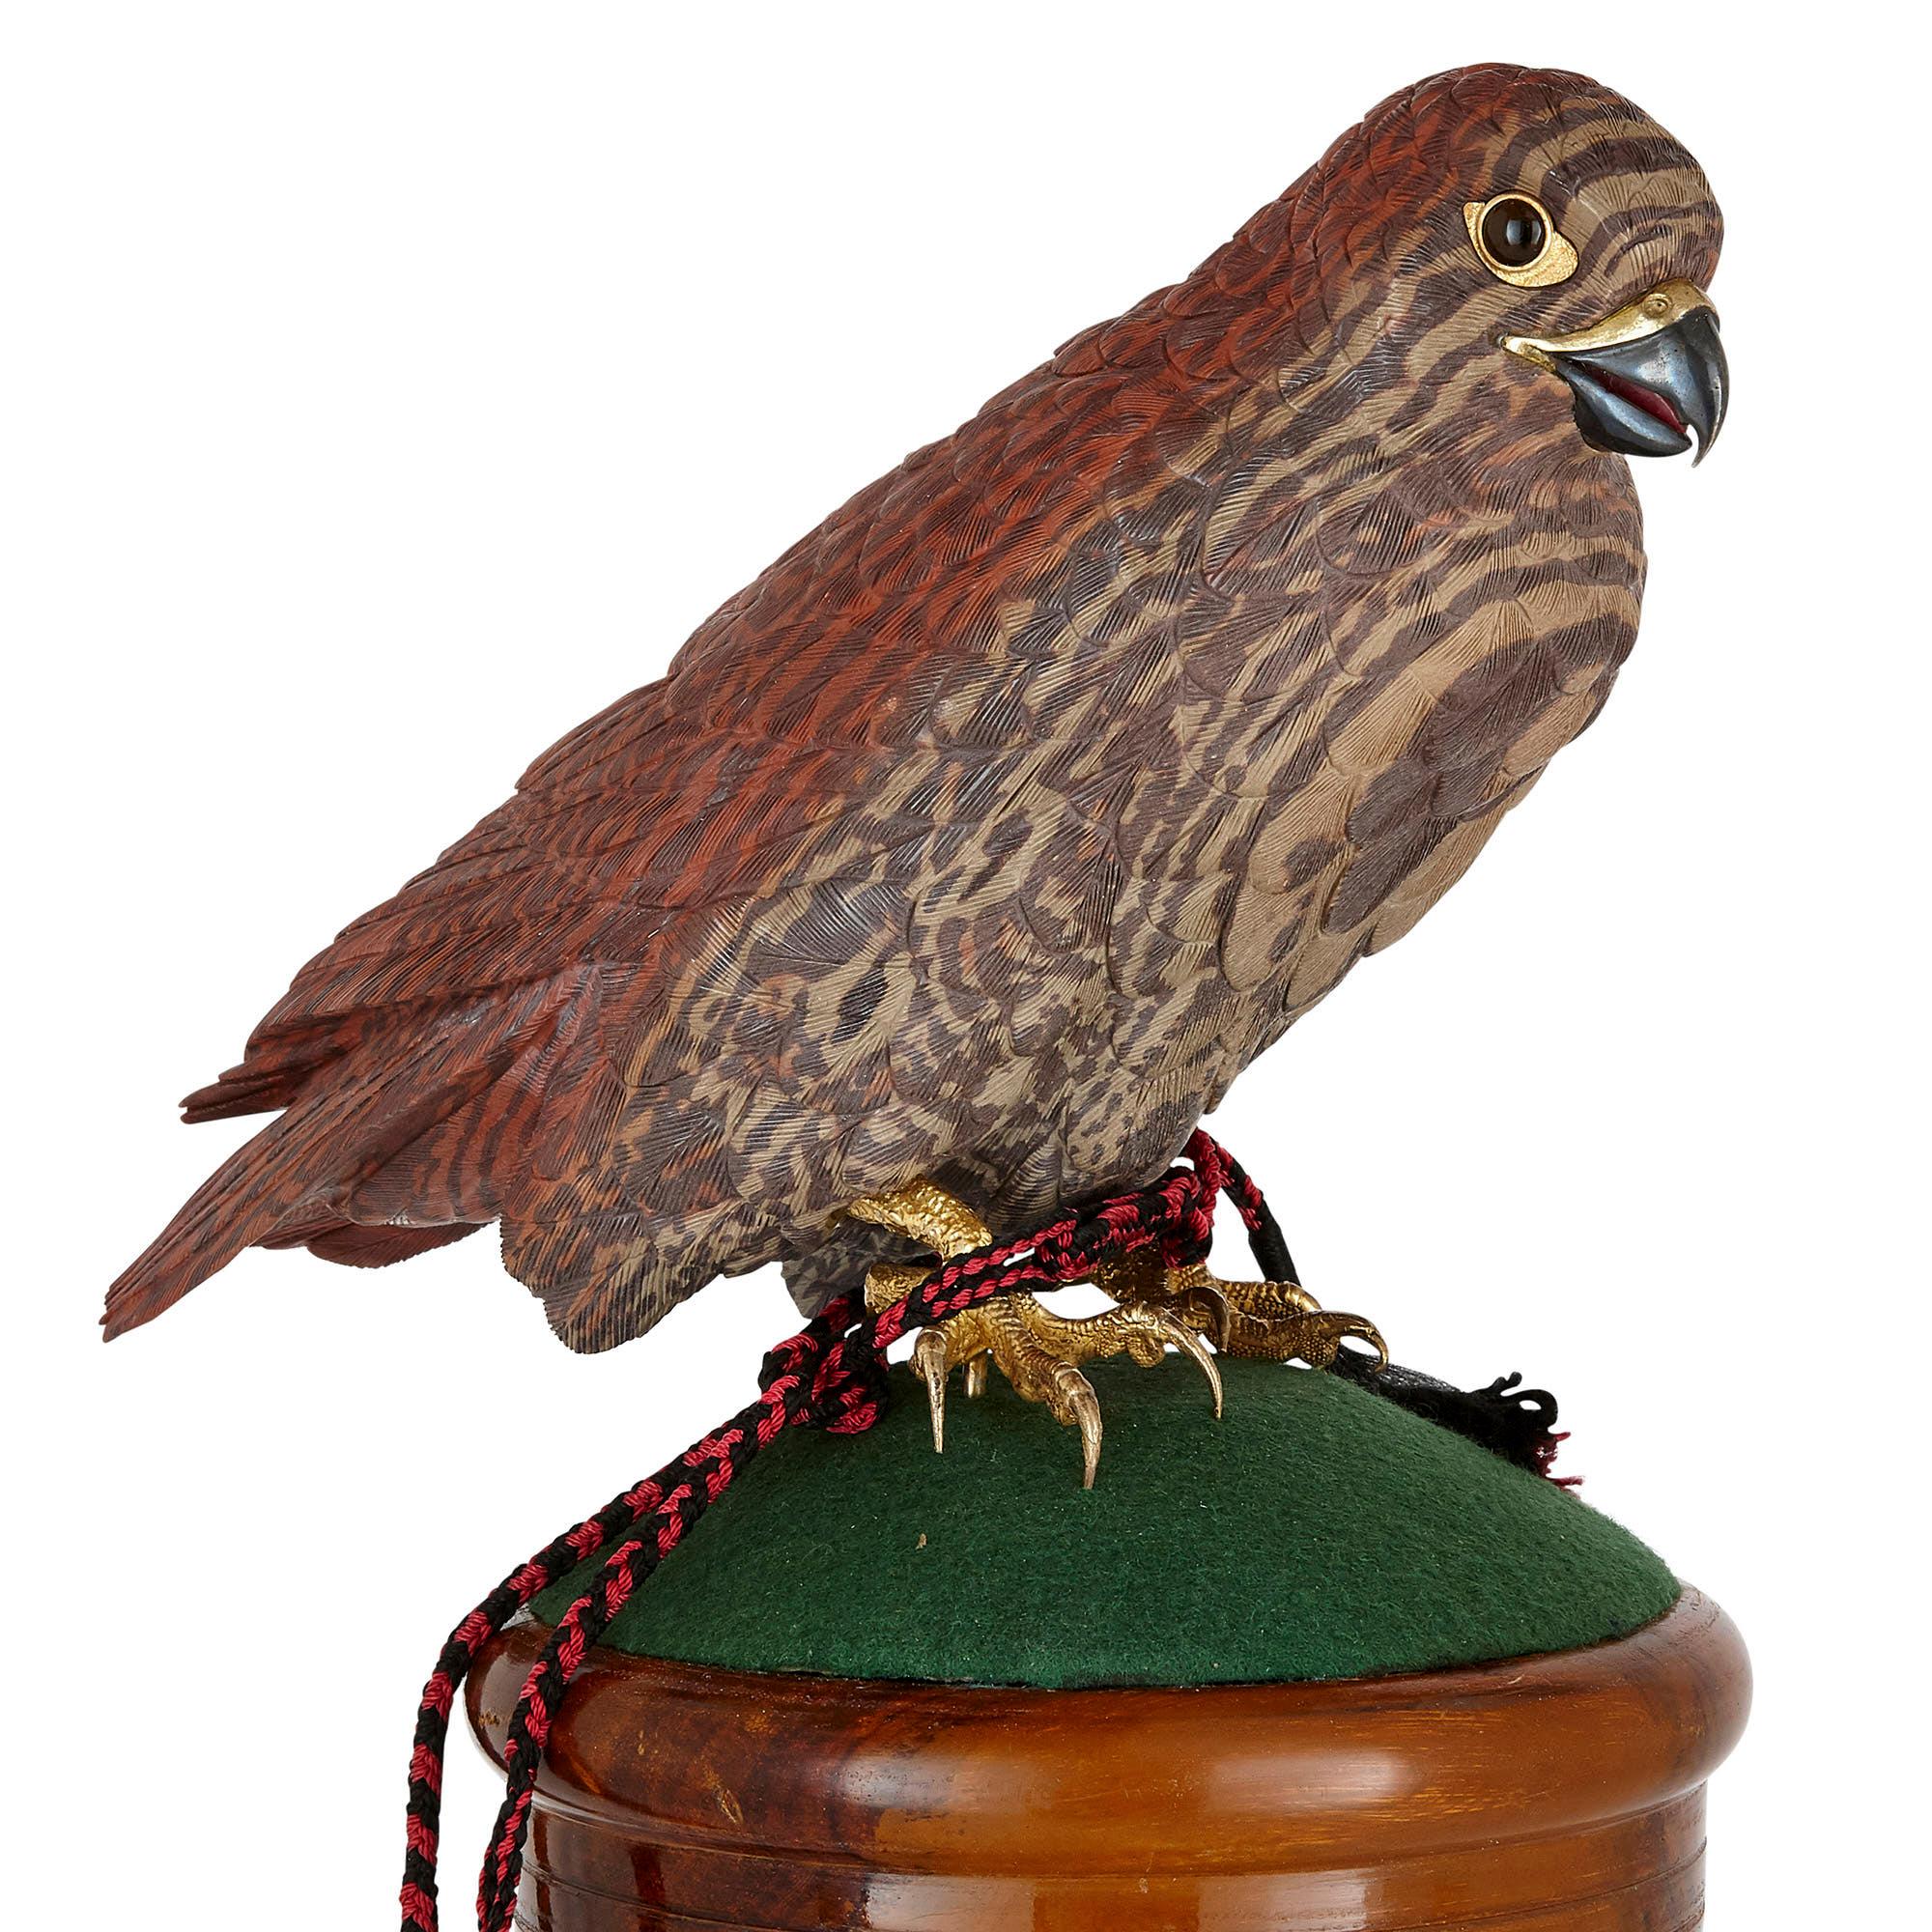 Zebra stone and vermeil model of a hawk
Continental, 20th century
Measures: Height 58cm, diameter 25cm

This bird model depicts a hawk perched atop a rest. The body of the hawk, which is realistically carved from zebra stone, is mounted with